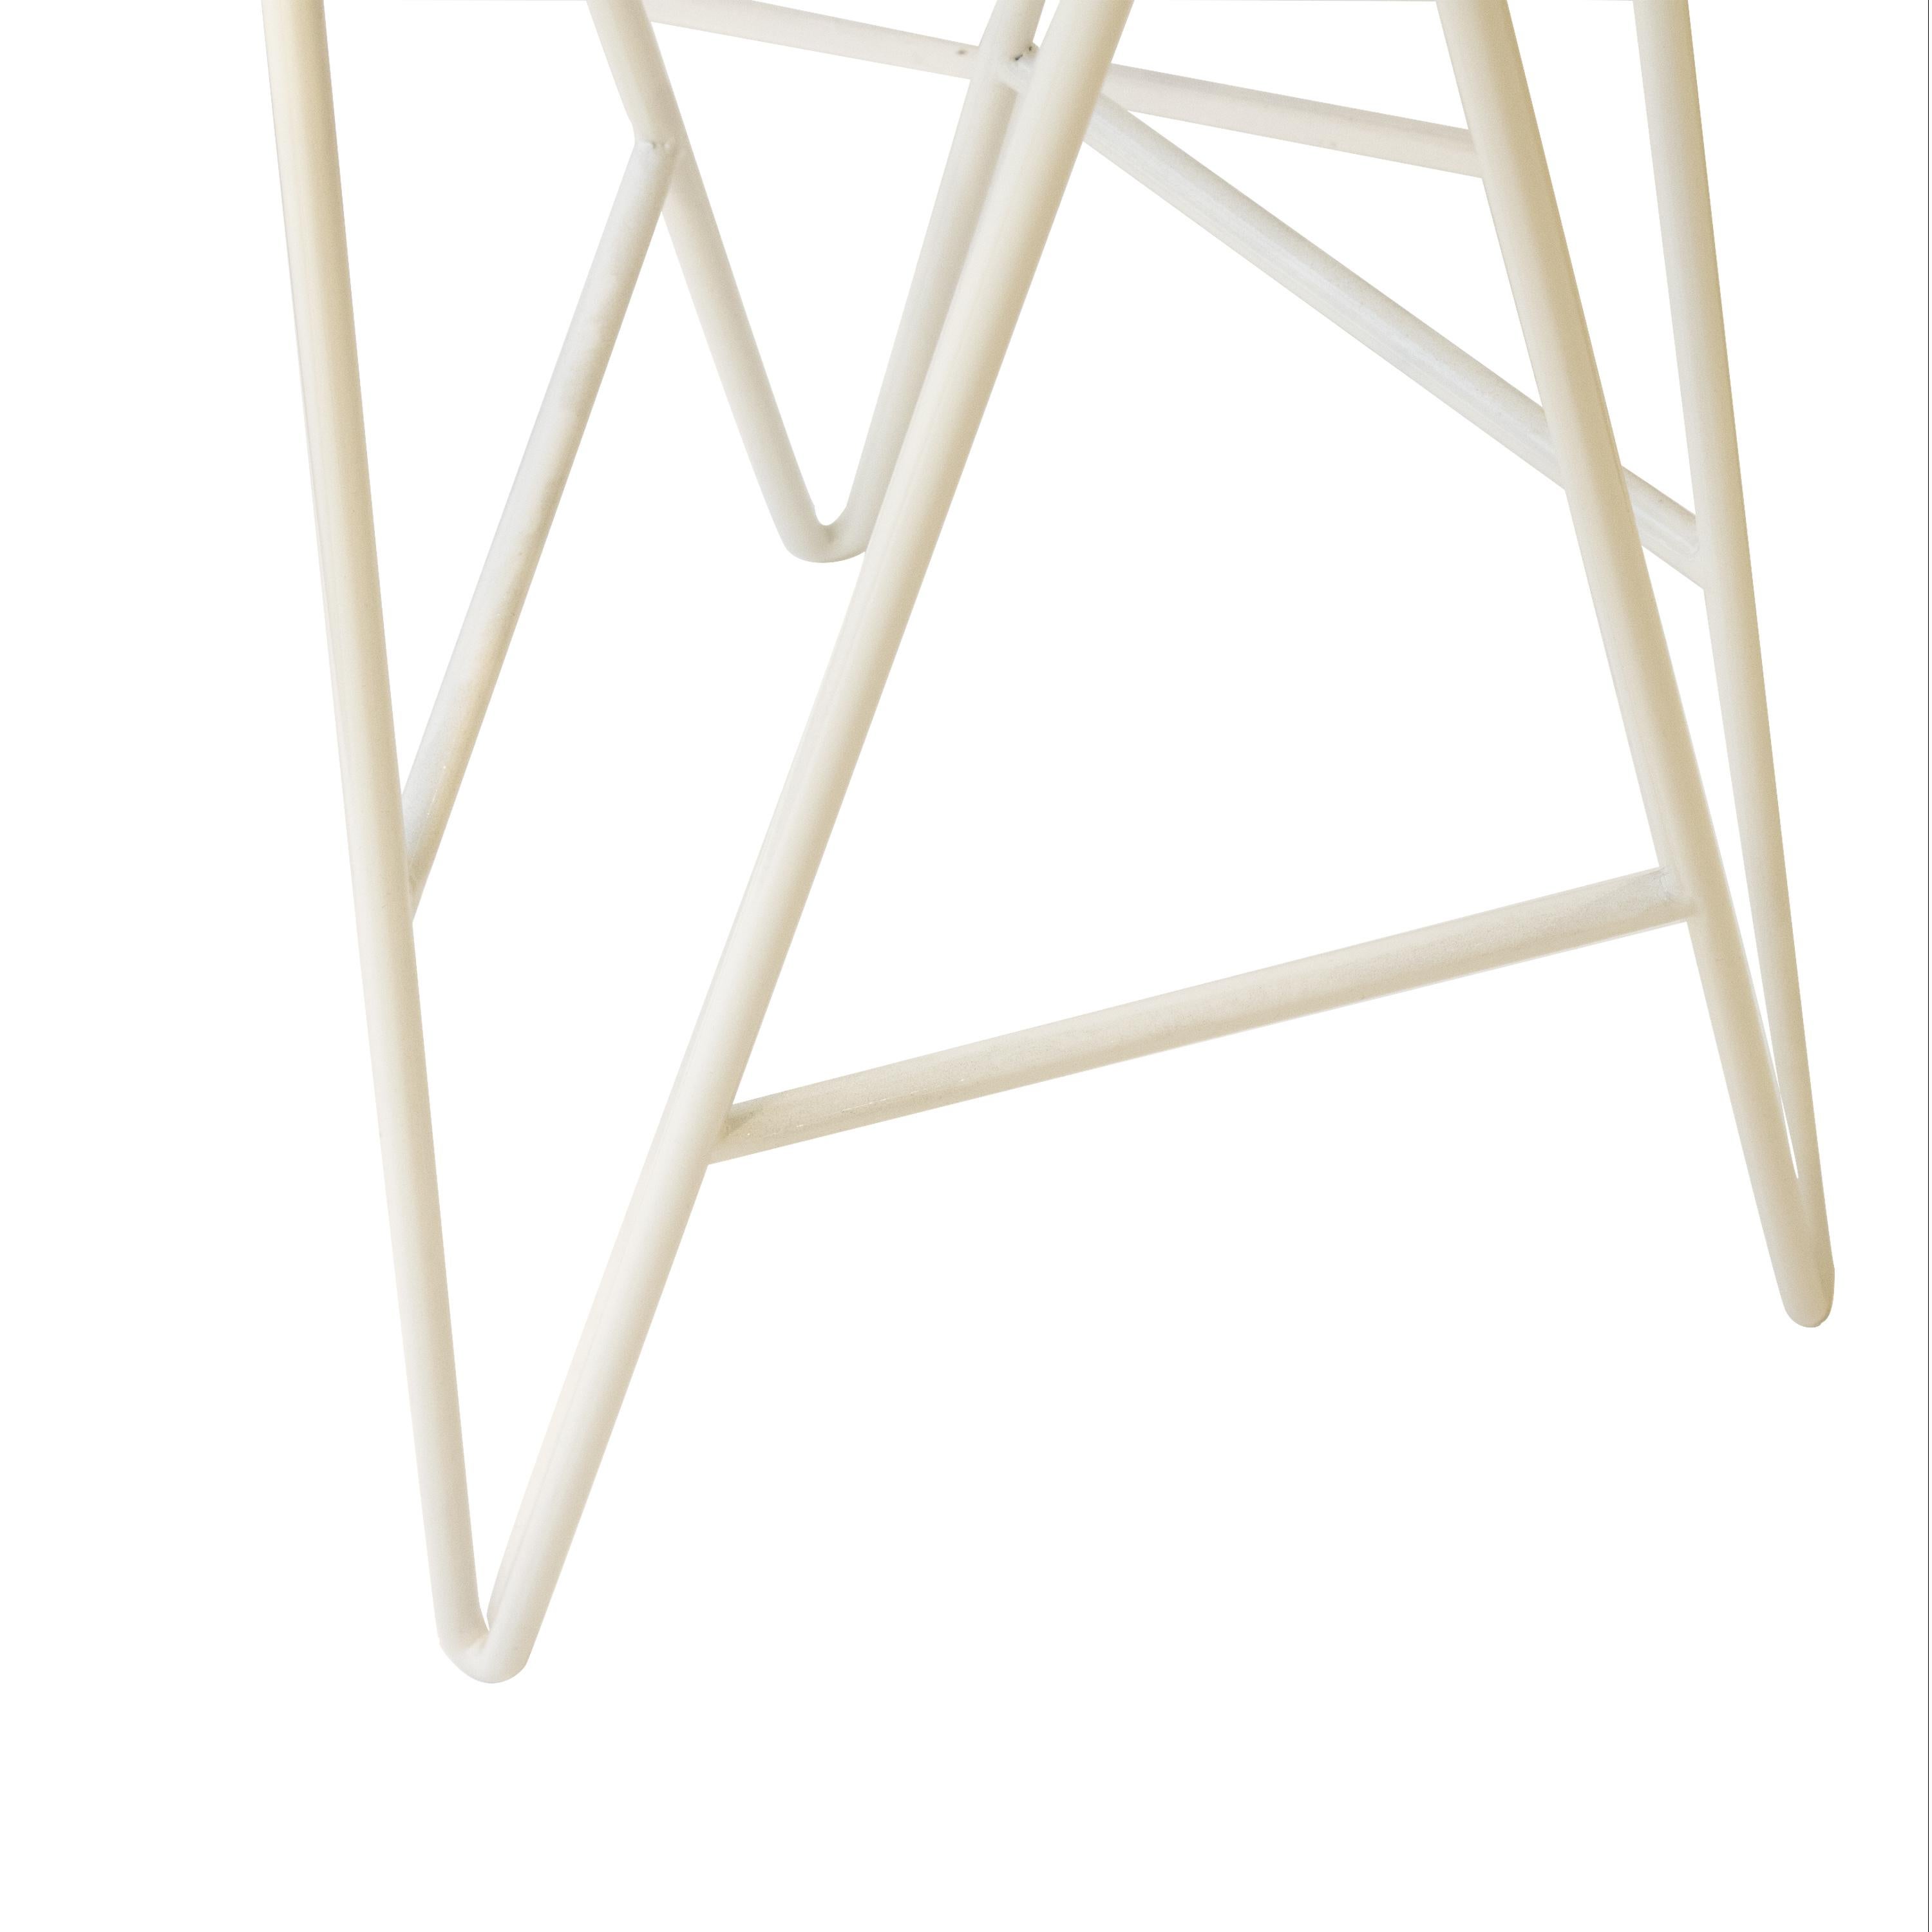 Contemporary Steel Stool Designed By IKB191 with Geometric Pattaron, Spain 2022. For Sale